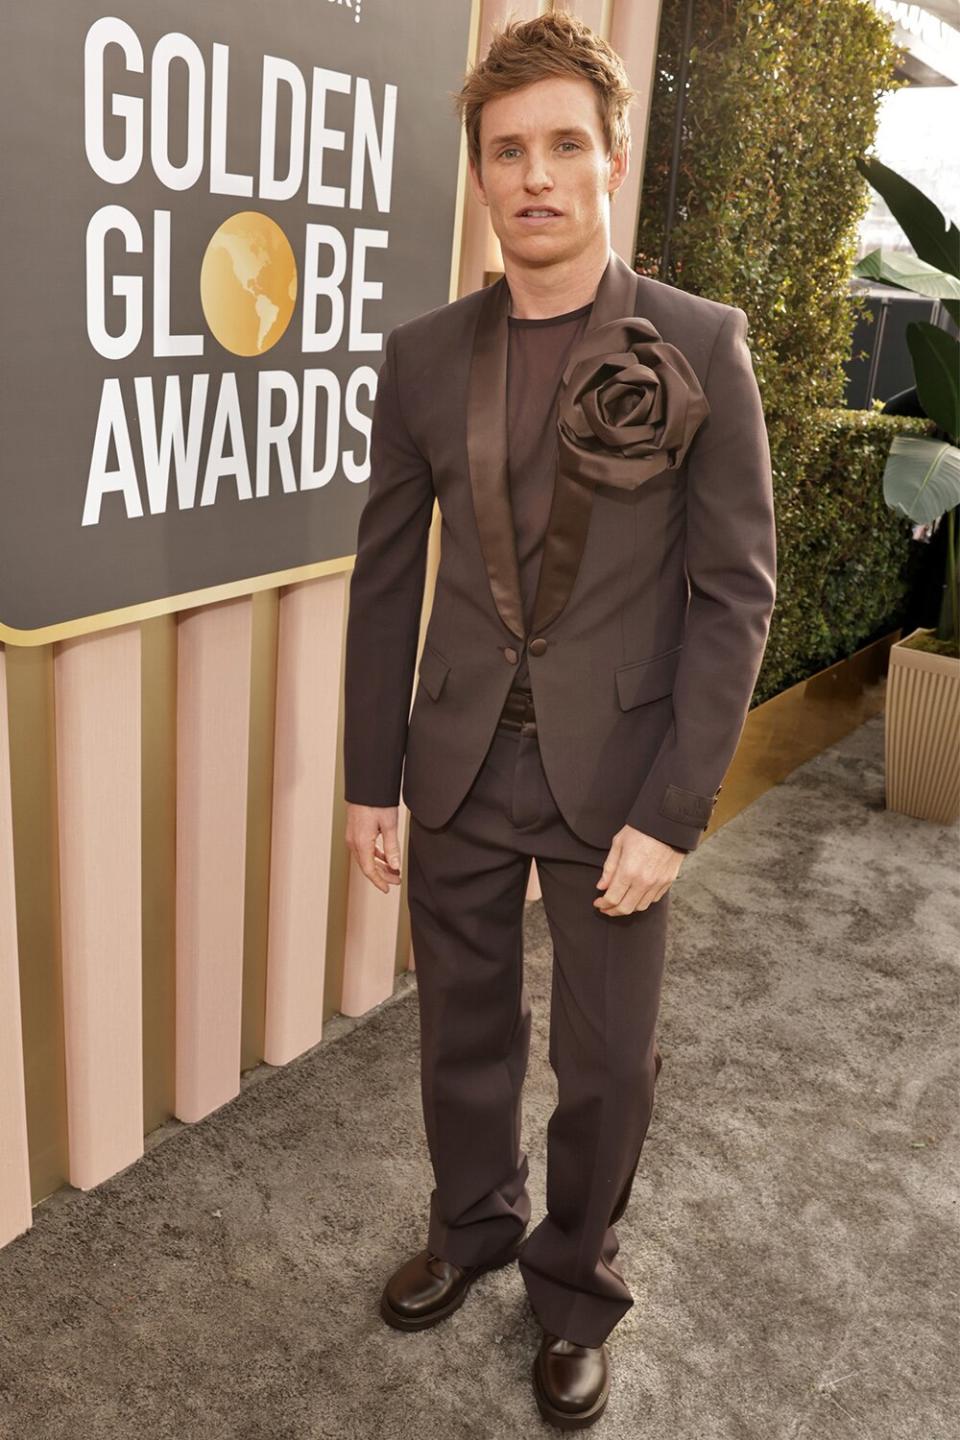 BEVERLY HILLS, CALIFORNIA - JANUARY 10: 80th Annual GOLDEN GLOBE AWARDS -- Pictured: Eddie Redmayne arrives at the 80th Annual Golden Globe Awards held at the Beverly Hilton Hotel on January 10, 2023 in Beverly Hills, California. -- (Photo by Todd Williamson/NBC/NBC via Getty Images)